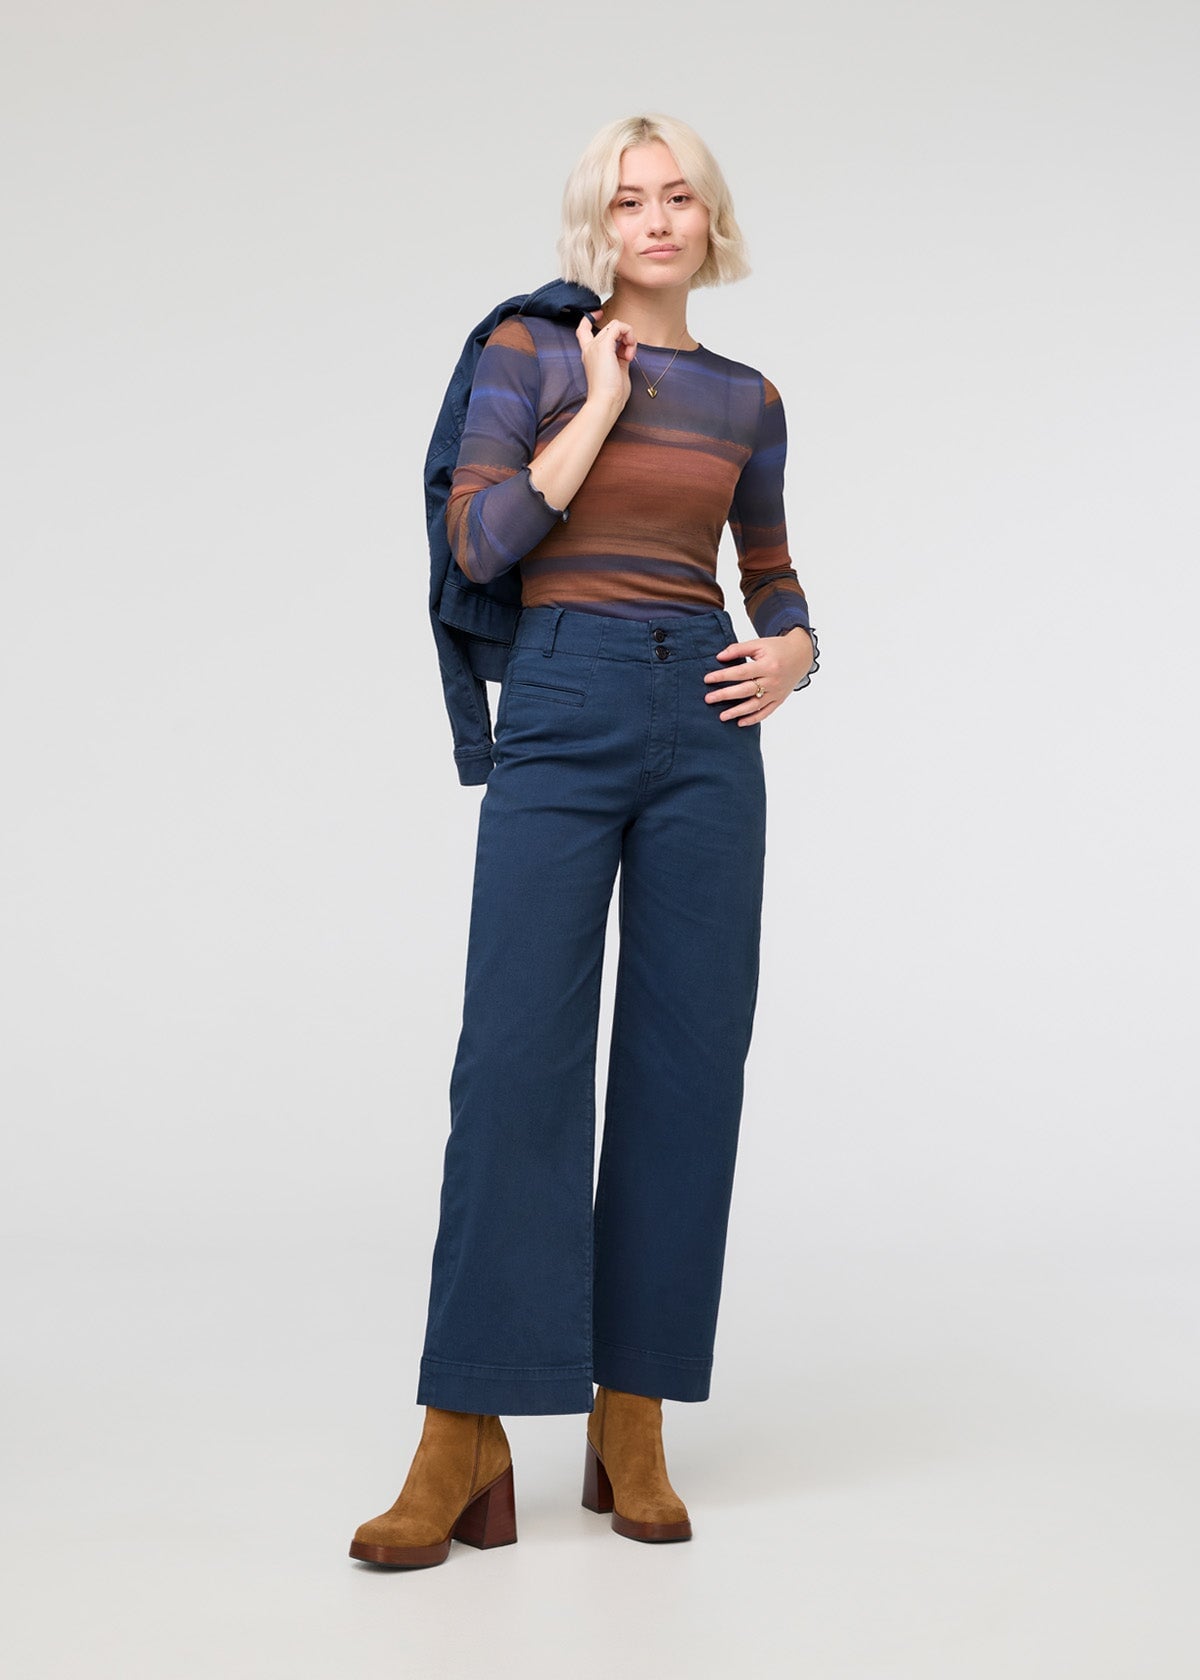 Buy Women's Blue High Waisted Trousers Online